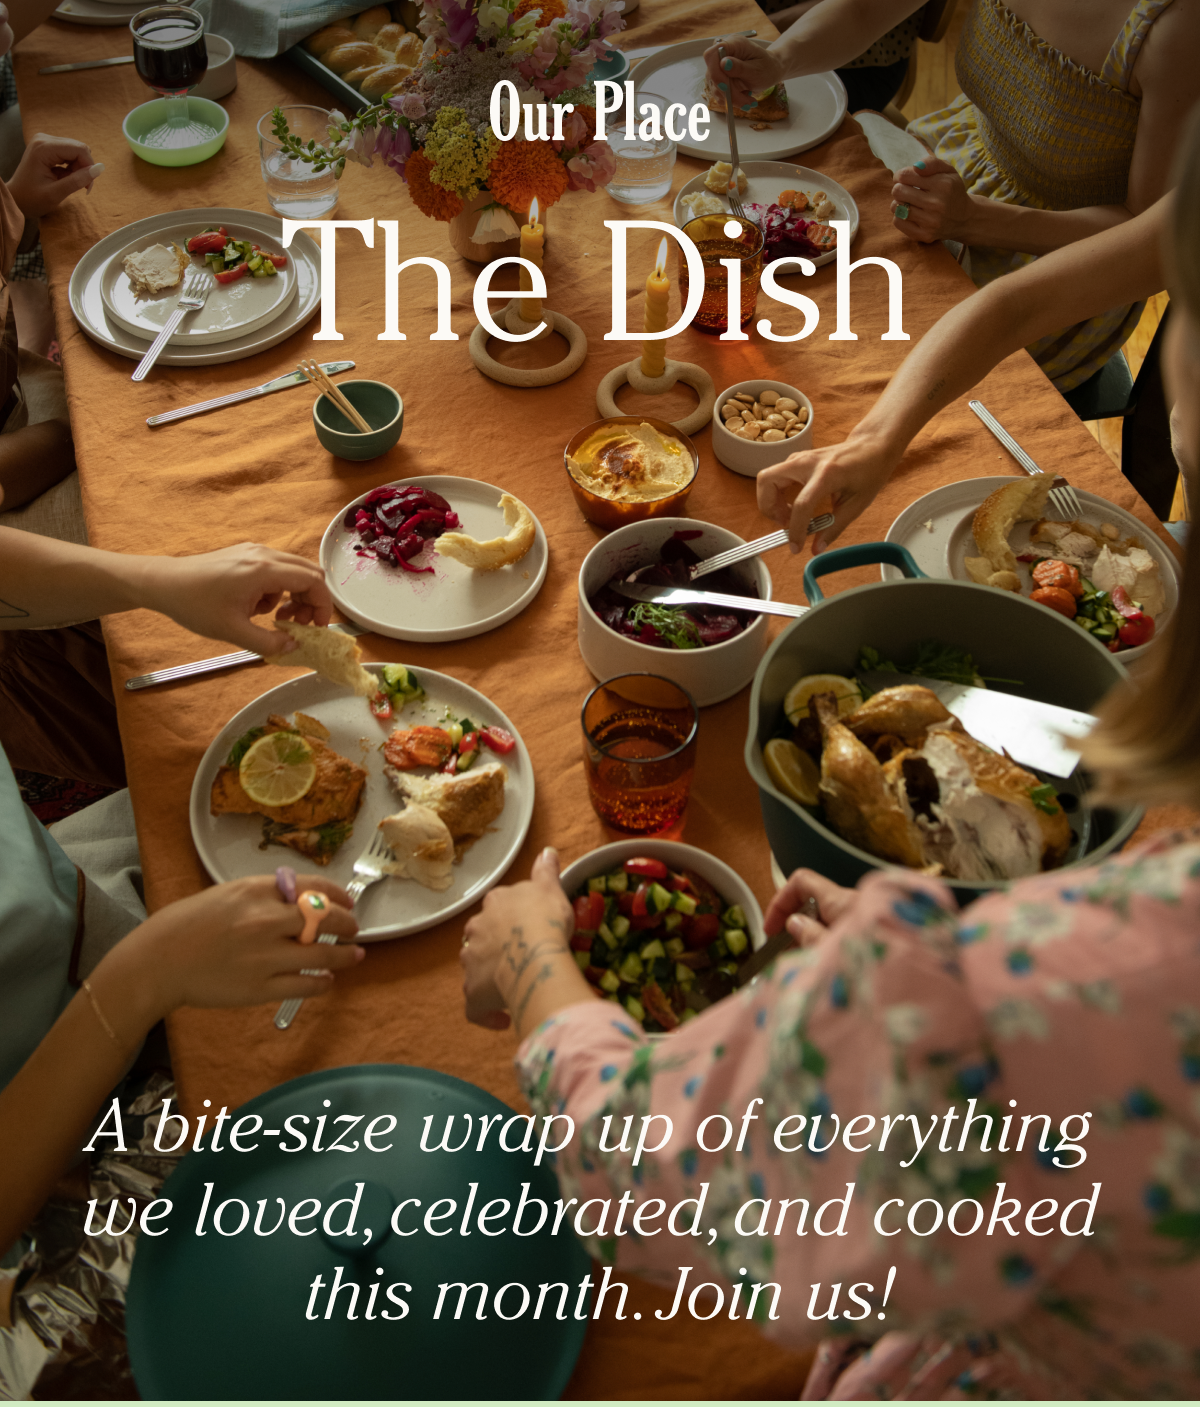 Our Place - The Dish - A bite-size wrap up of everything we loved, celebrated, and cooked this month. Join us!